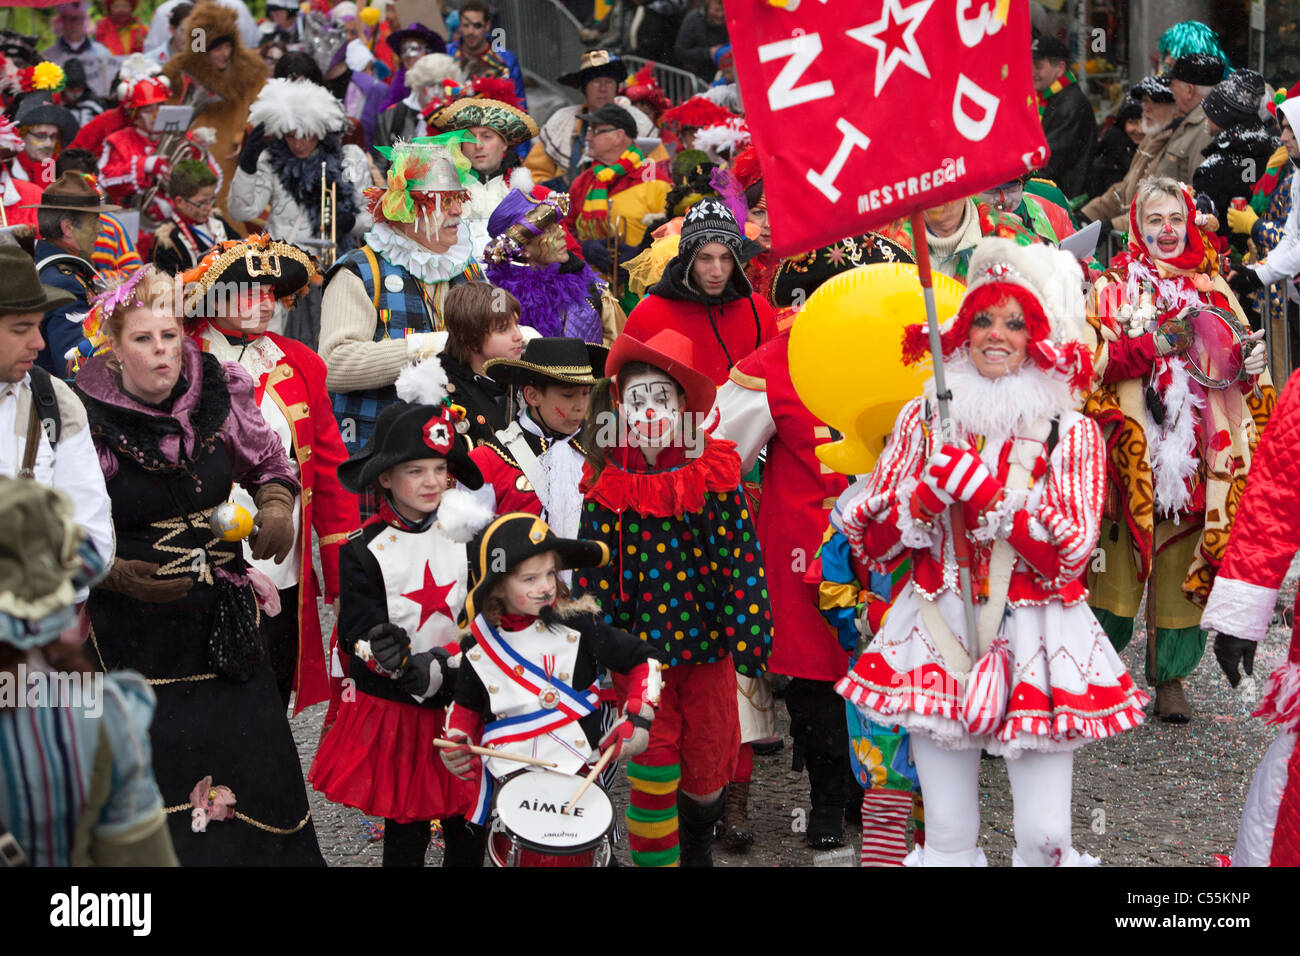 The Netherlands, Maastricht, People enjoying during yearly Carnival festival. Stock Photo